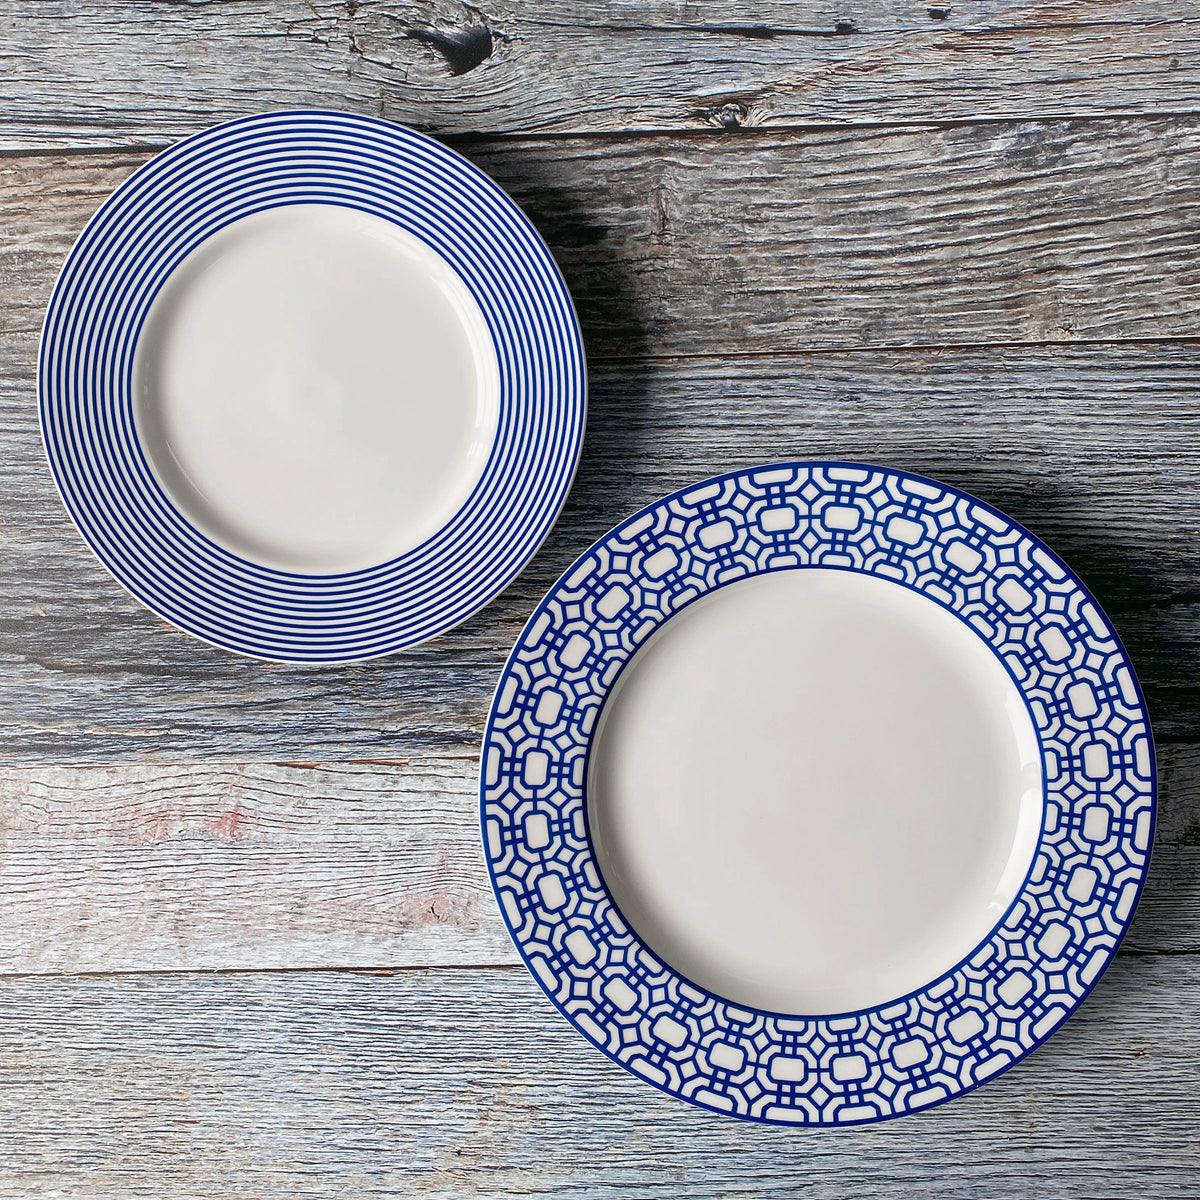 Two Newport Racing Stripe Rimmed Salad Plates by Caskata Artisanal Home on a wood surface.